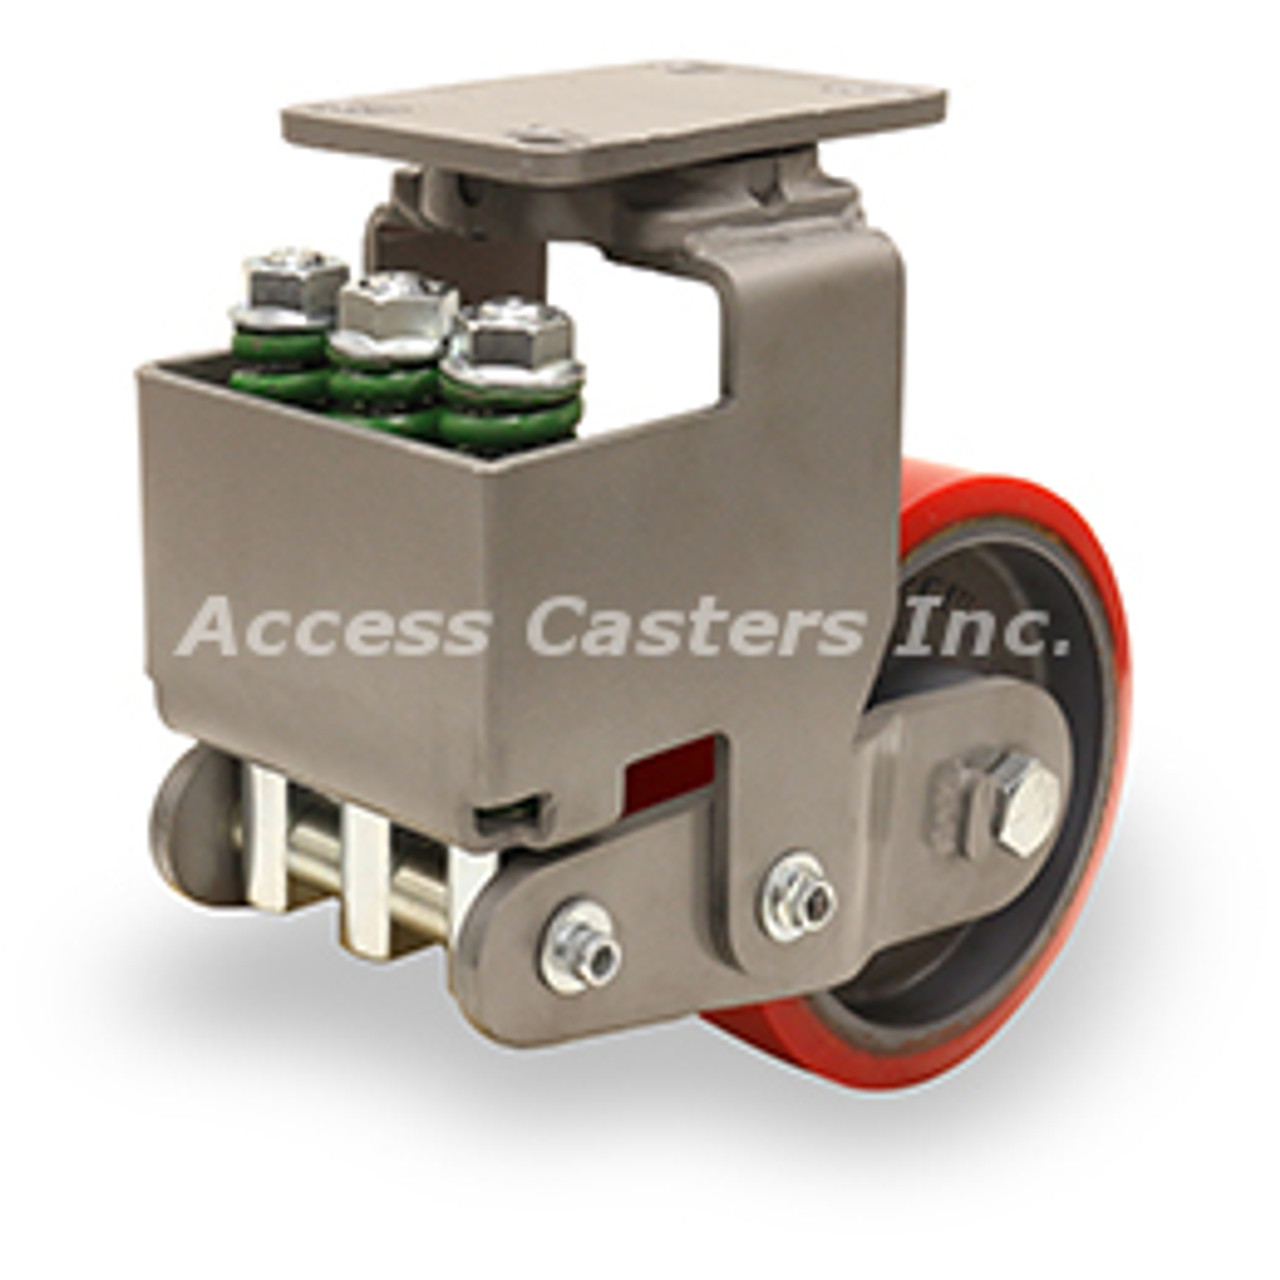 S-AEZFFM-63TRB Spring loaded caster with 6" x 3" Ultralast wheel